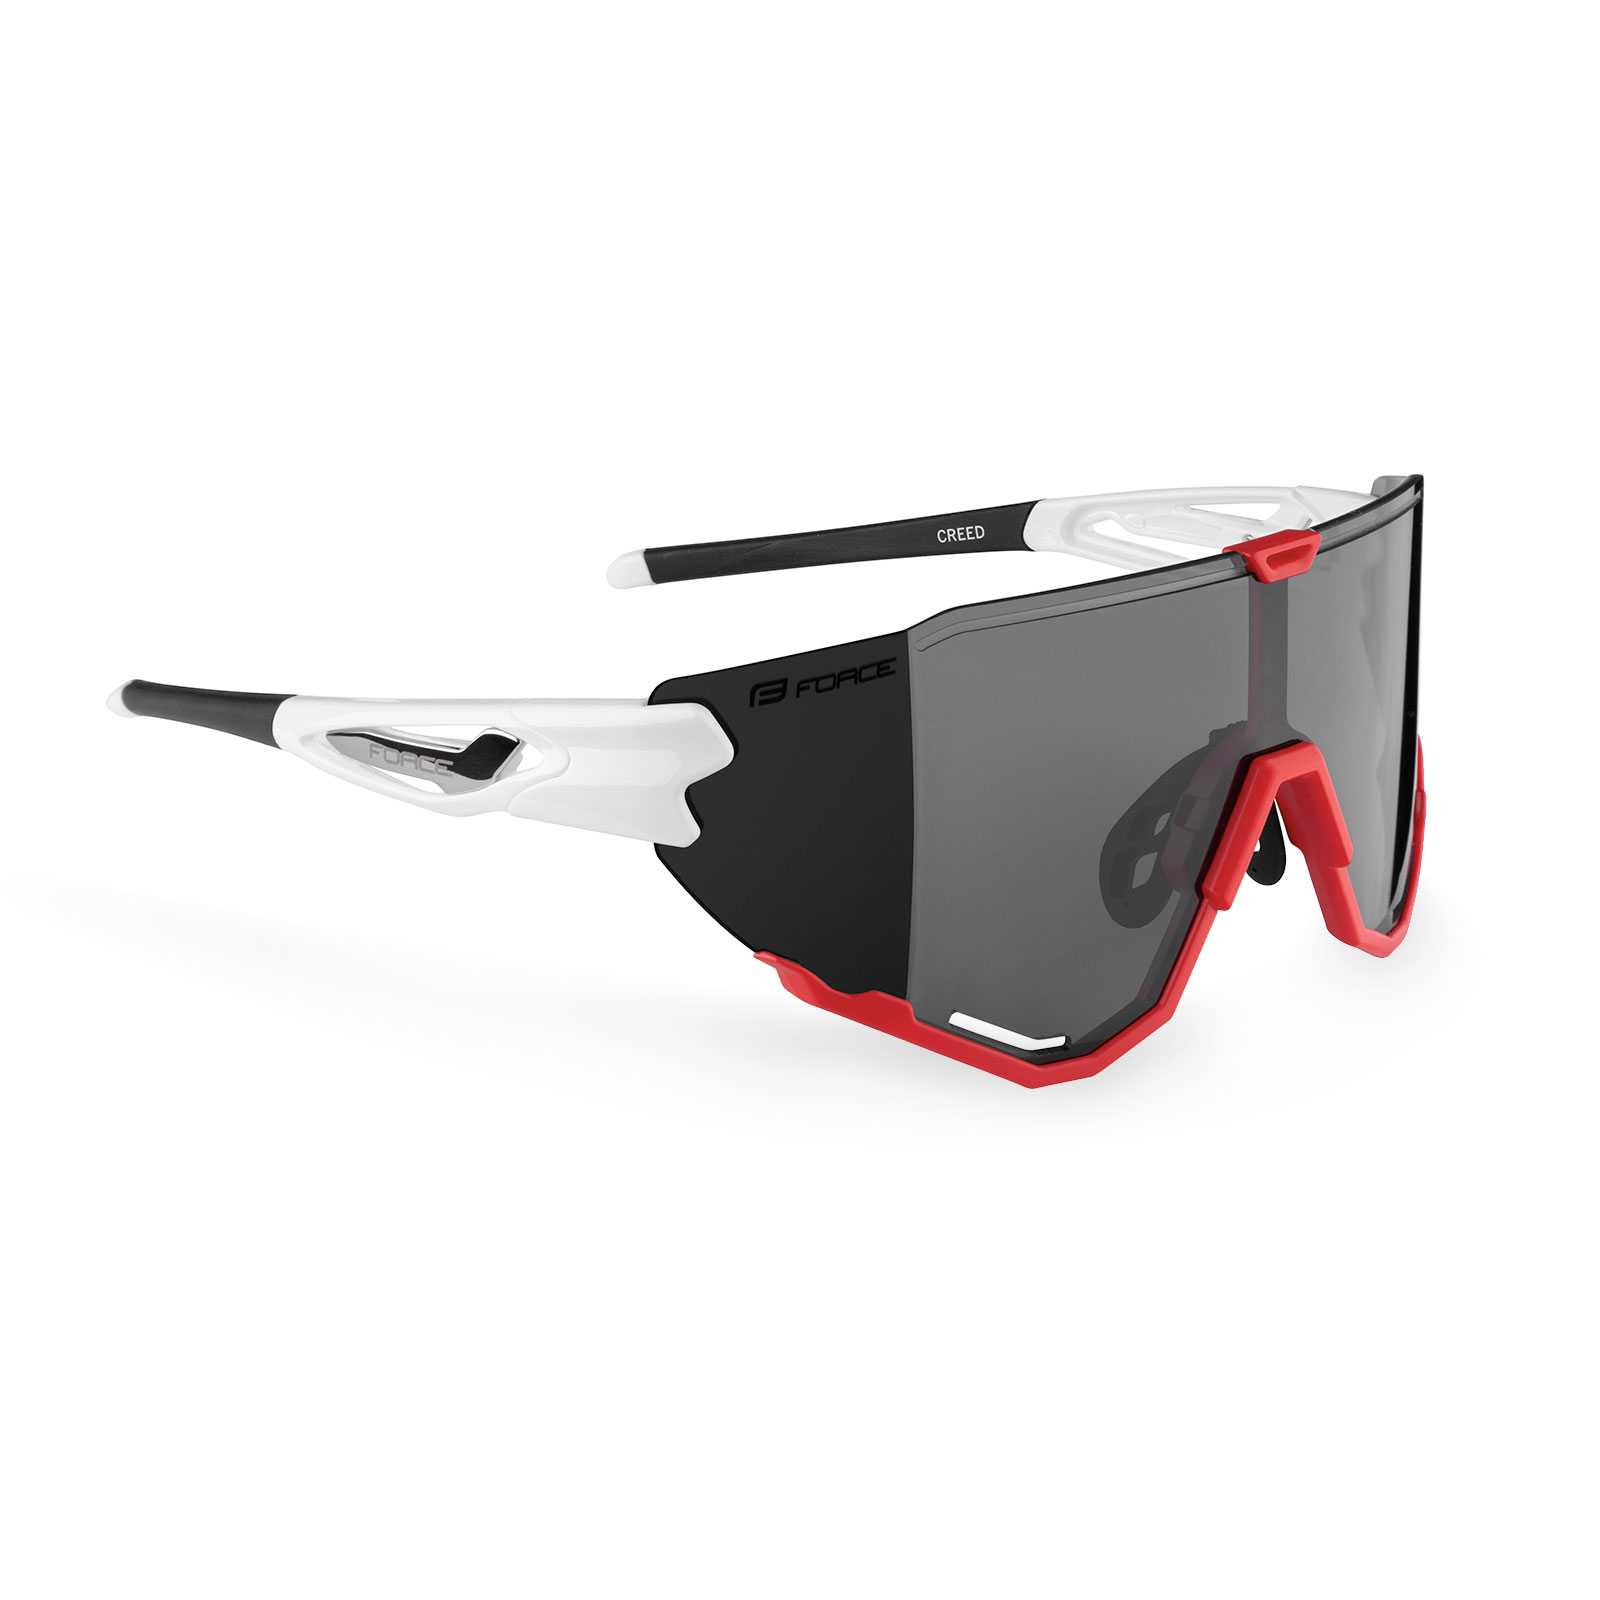 FORCE CREED solbrille, white/red - mirror, hoved